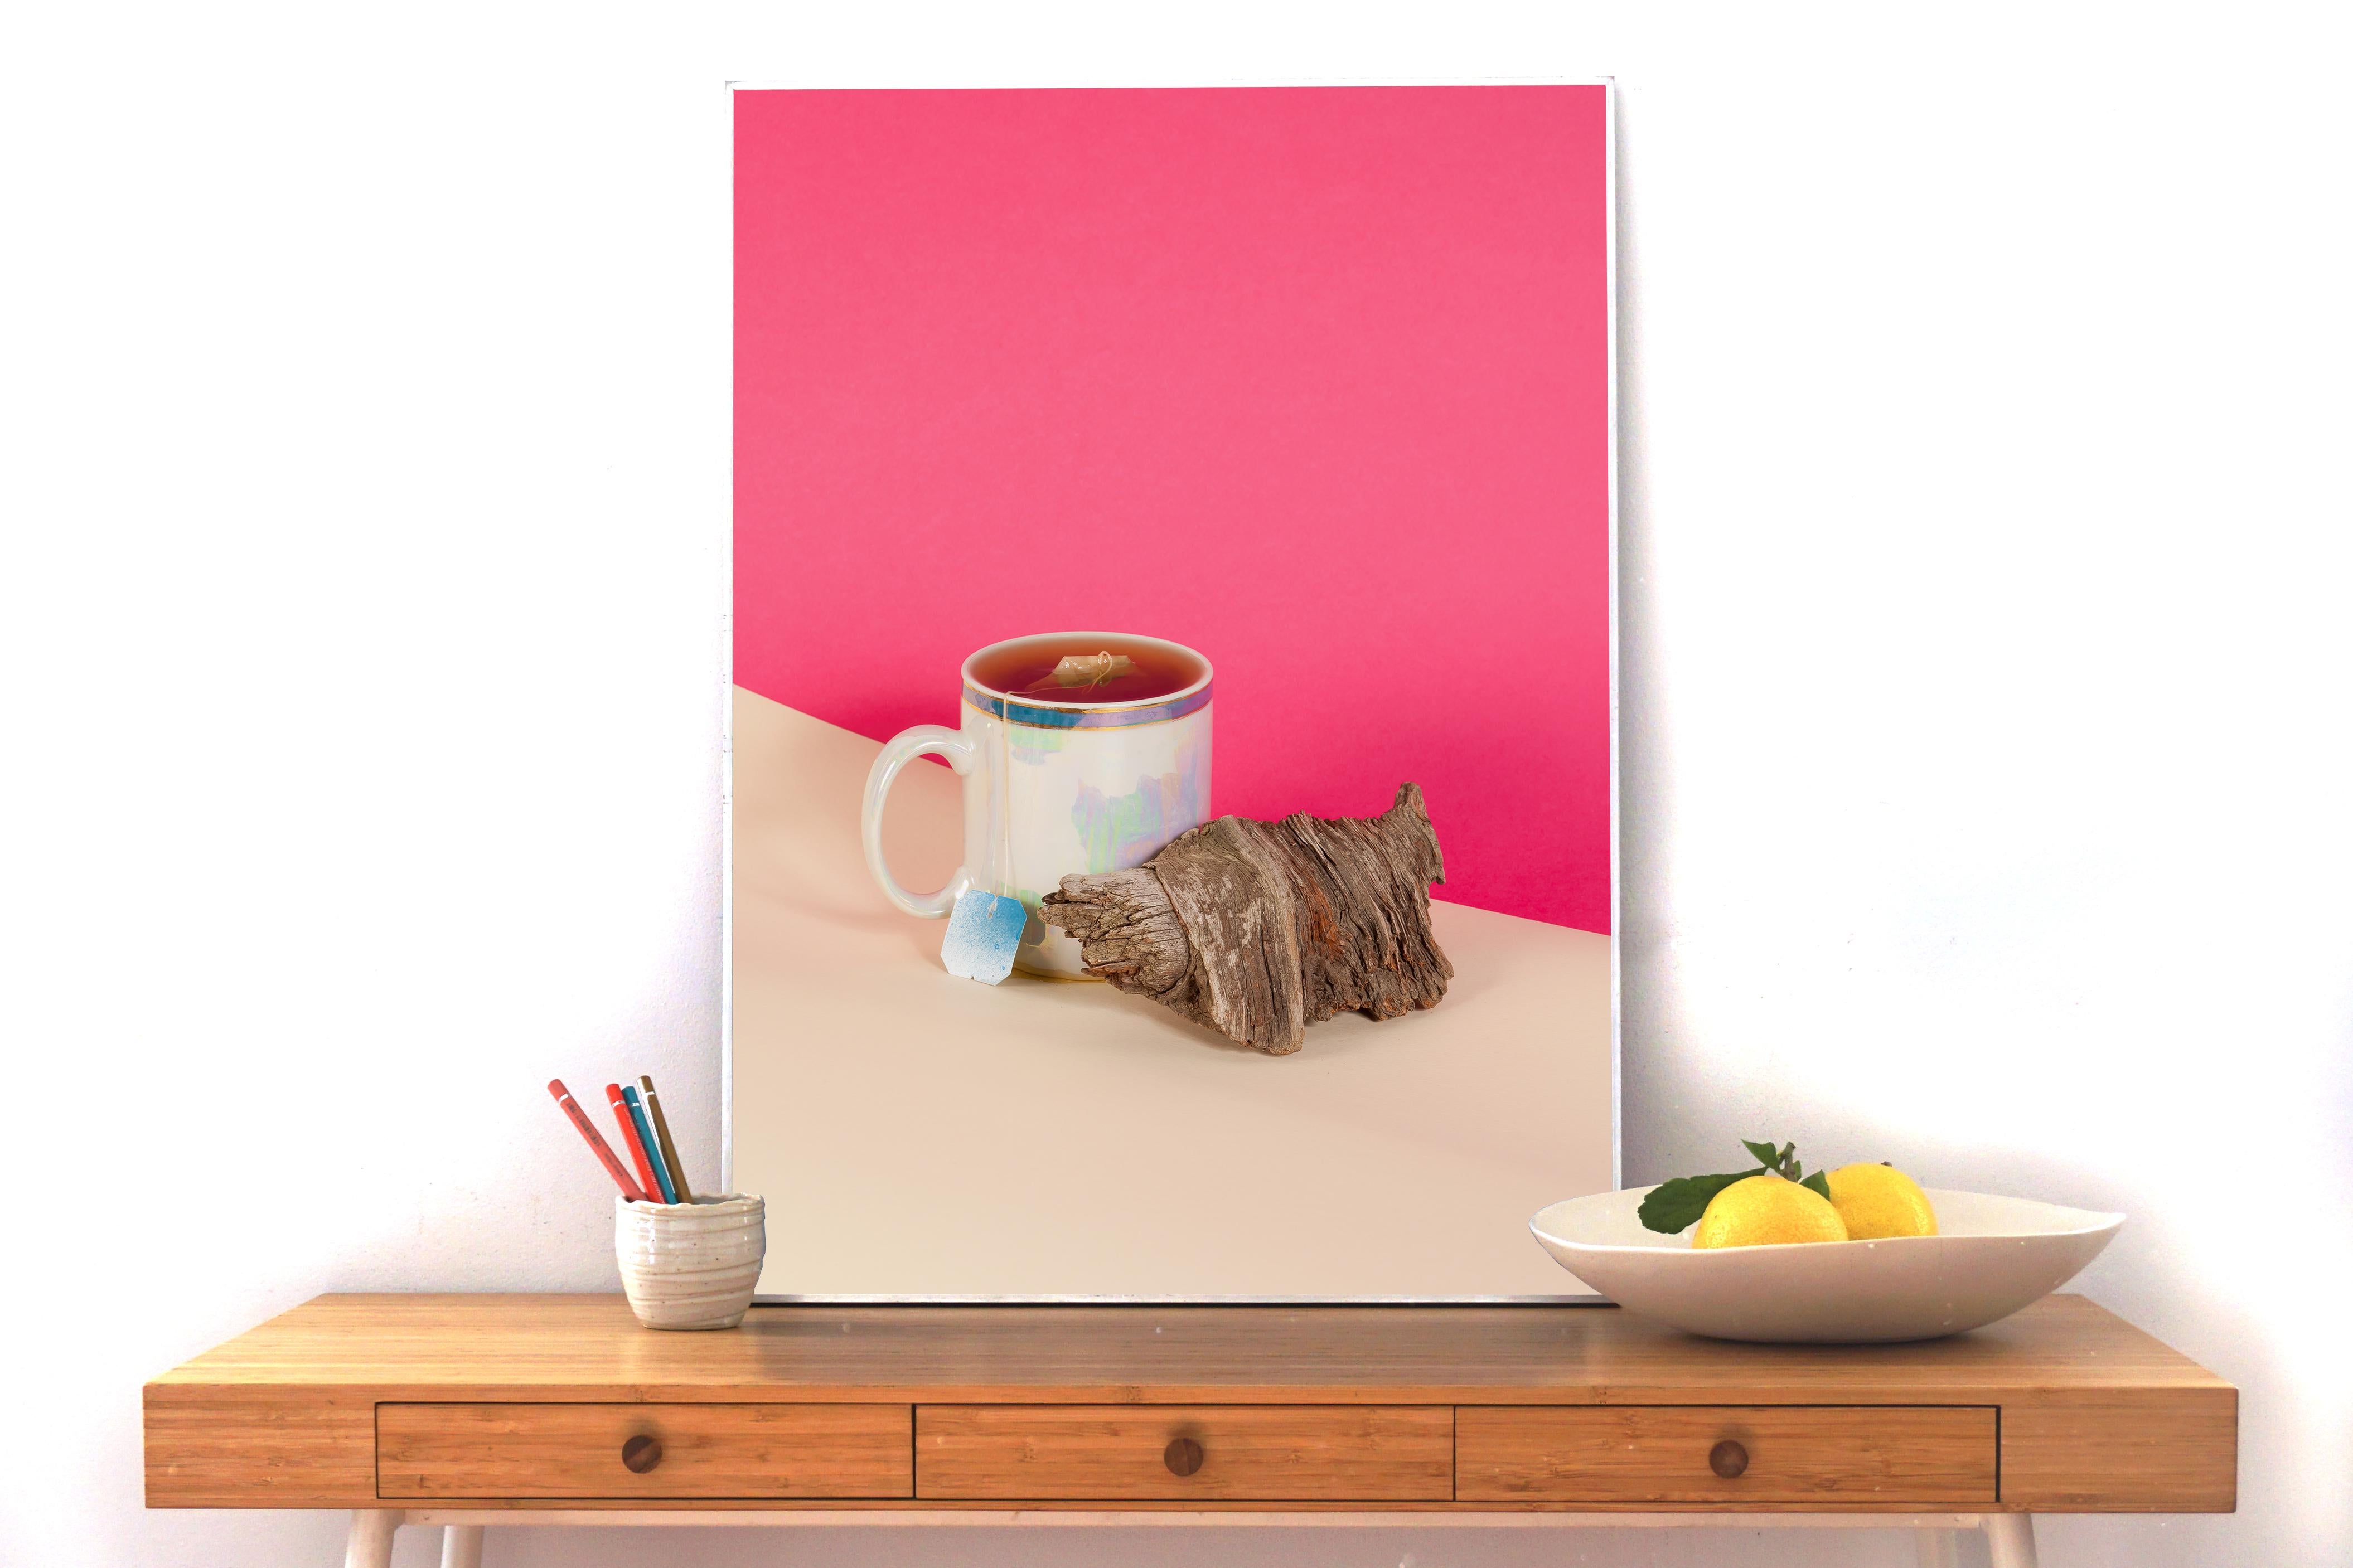 Pink Background Still Life Scene, Cup of Tea, Wood Croissant, Retro, Giclée  - Photograph by Ryan Rivadeneyra